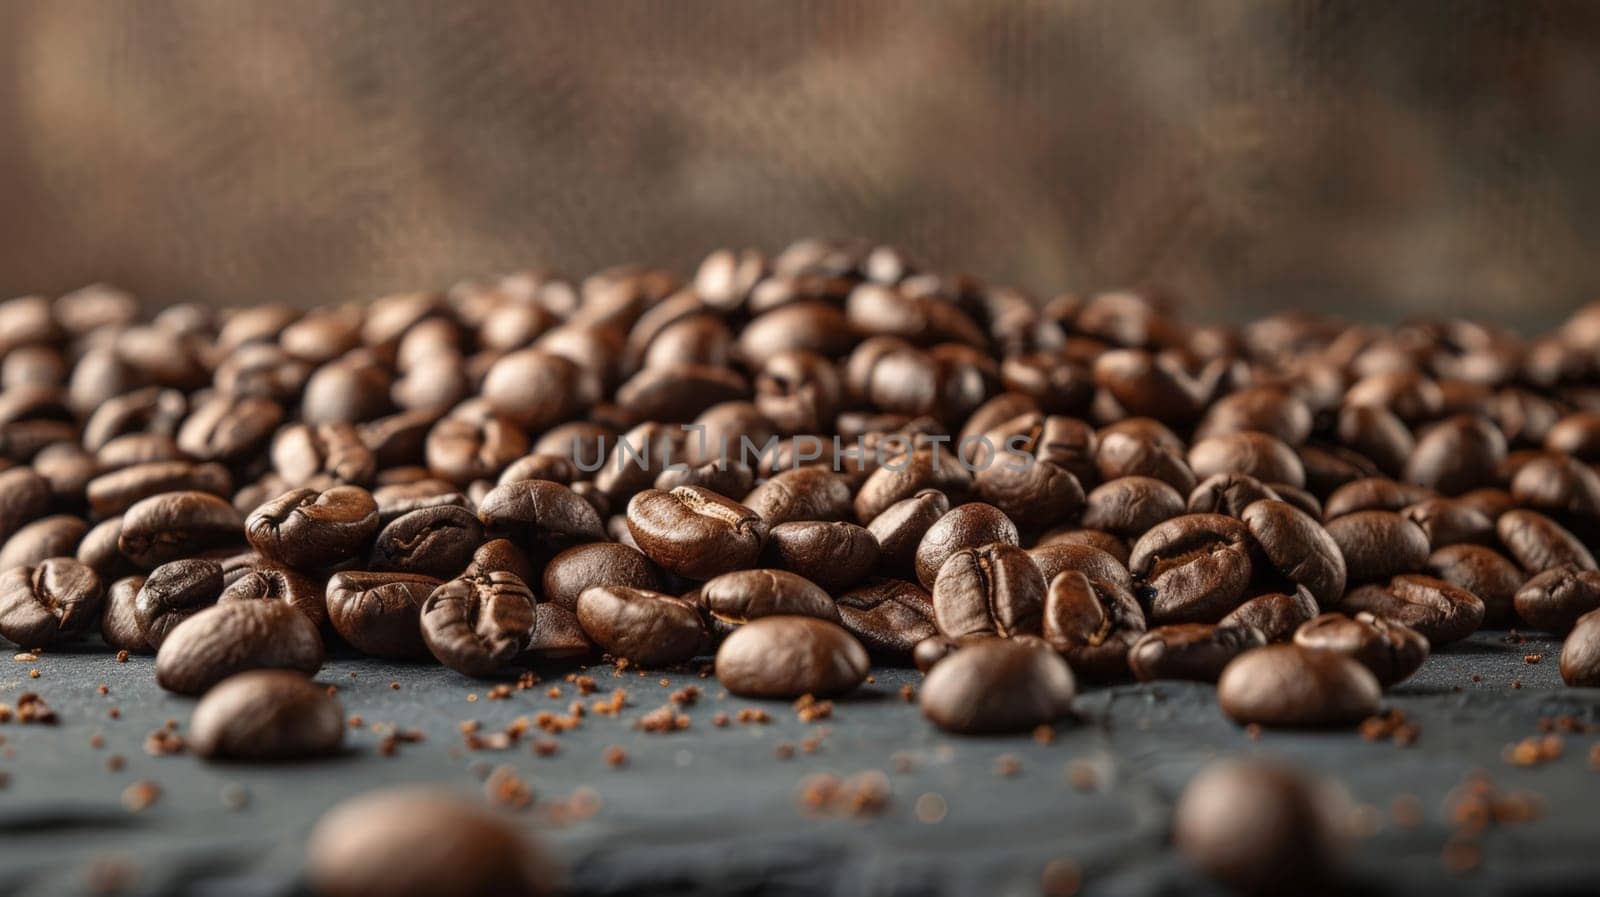 A pile of coffee beans on a wooden surface.